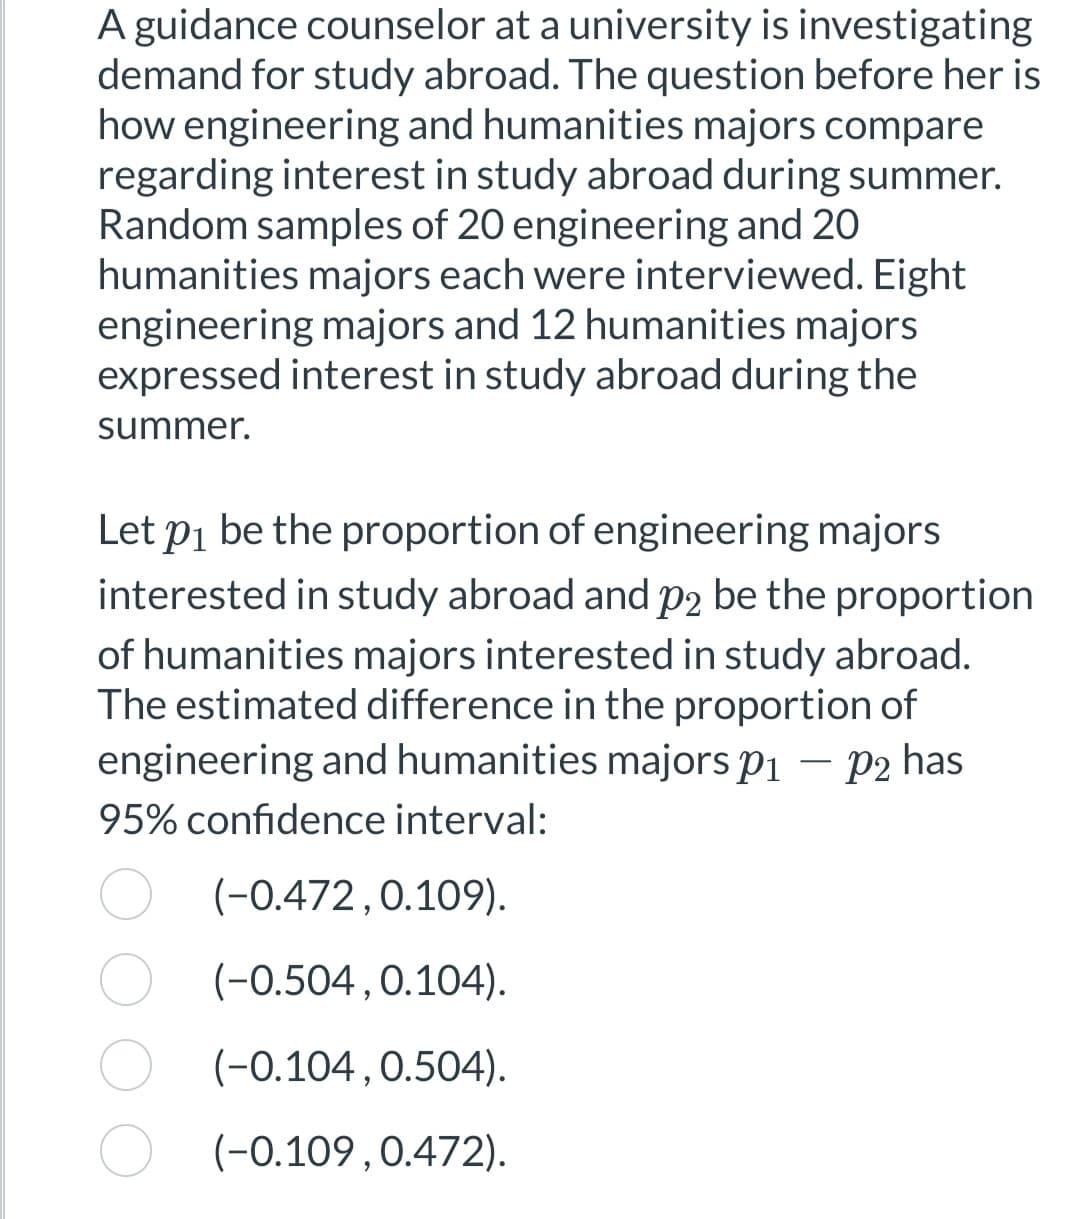 A guidance counselor at a university is investigating
demand for study abroad. The question before her is
how engineering and humanities majors compare
regarding interest in study abroad during summer.
Random samples of 20 engineering and 20
humanities majors each were interviewed. Eight
engineering majors and 12 humanities majors
expressed interest in study abroad during the
summer.
Let p₁ be the proportion of engineering majors
interested in study abroad and p2 be the proportion
of humanities majors interested in study abroad.
The estimated difference in the proportion of
engineering and humanities majors p₁ - p2 has
95% confidence interval:
(-0.472,0.109).
(-0.504, 0.104).
(-0.104, 0.504).
(-0.109, 0.472).